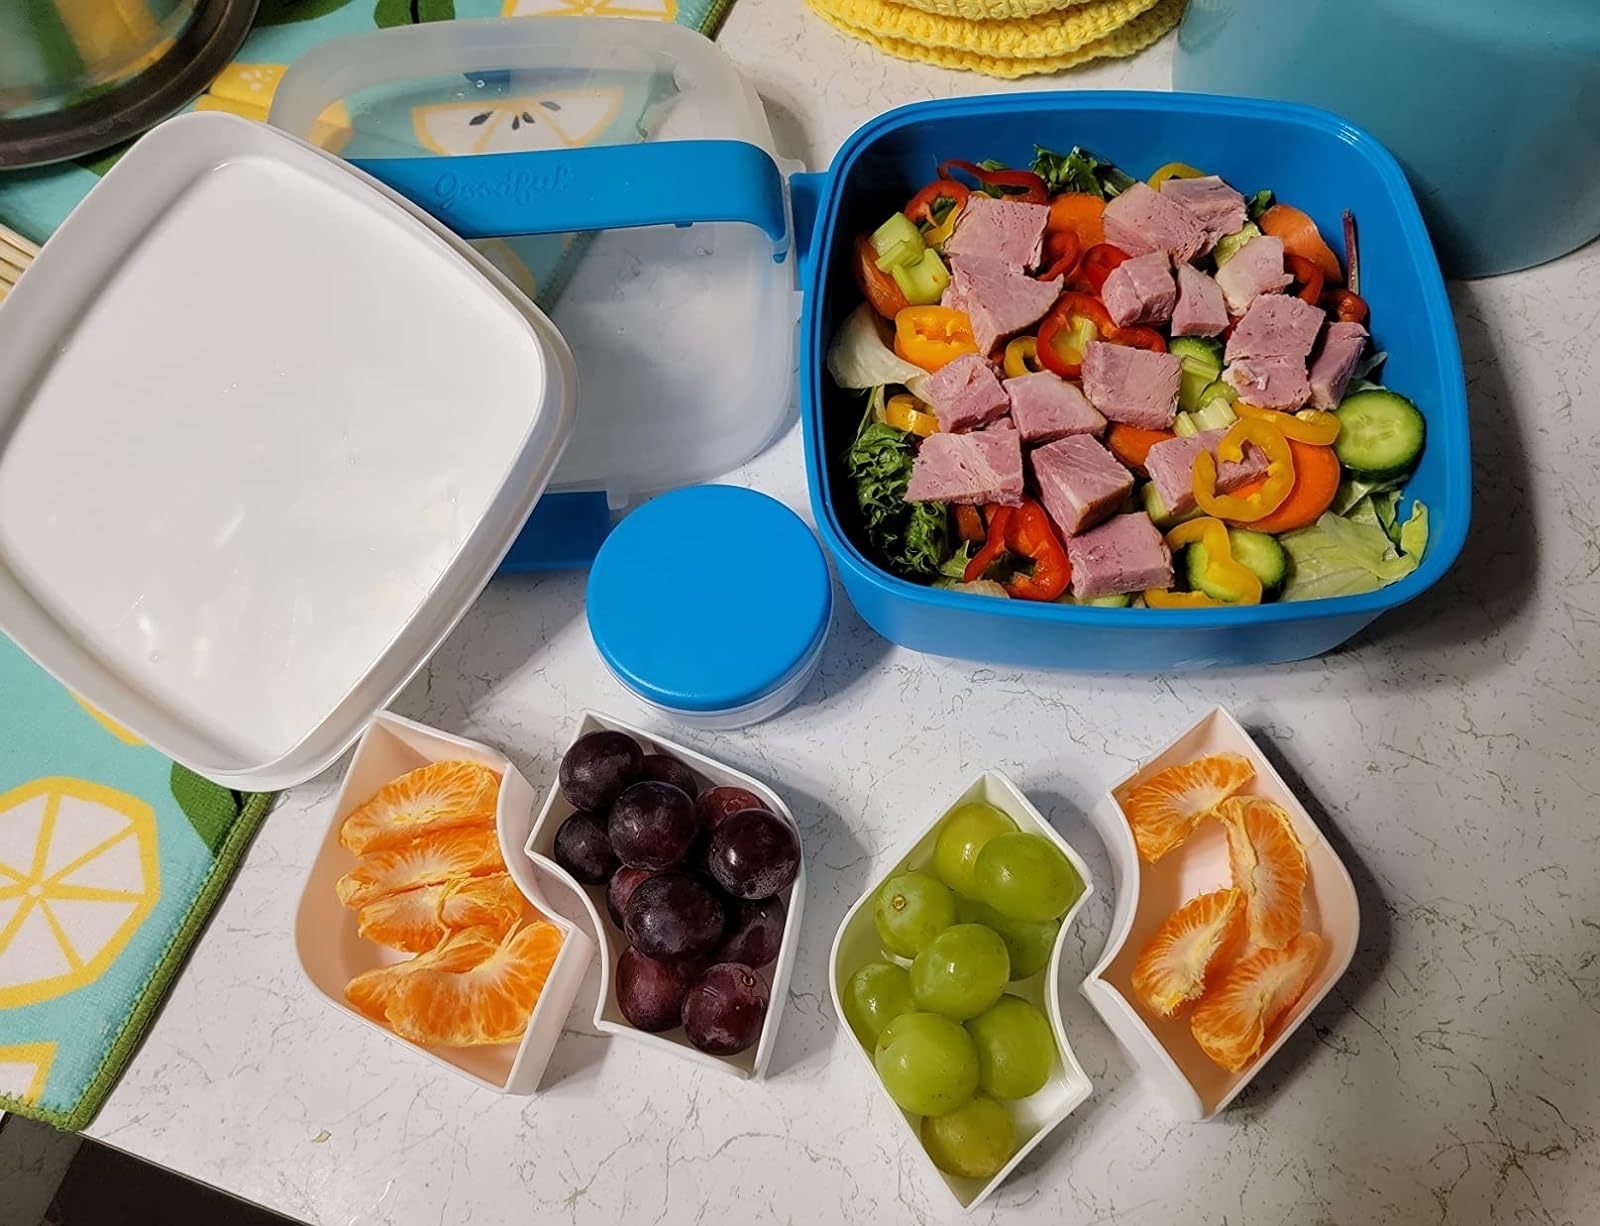 Reviewer image of the disassembled lunch box with food in each